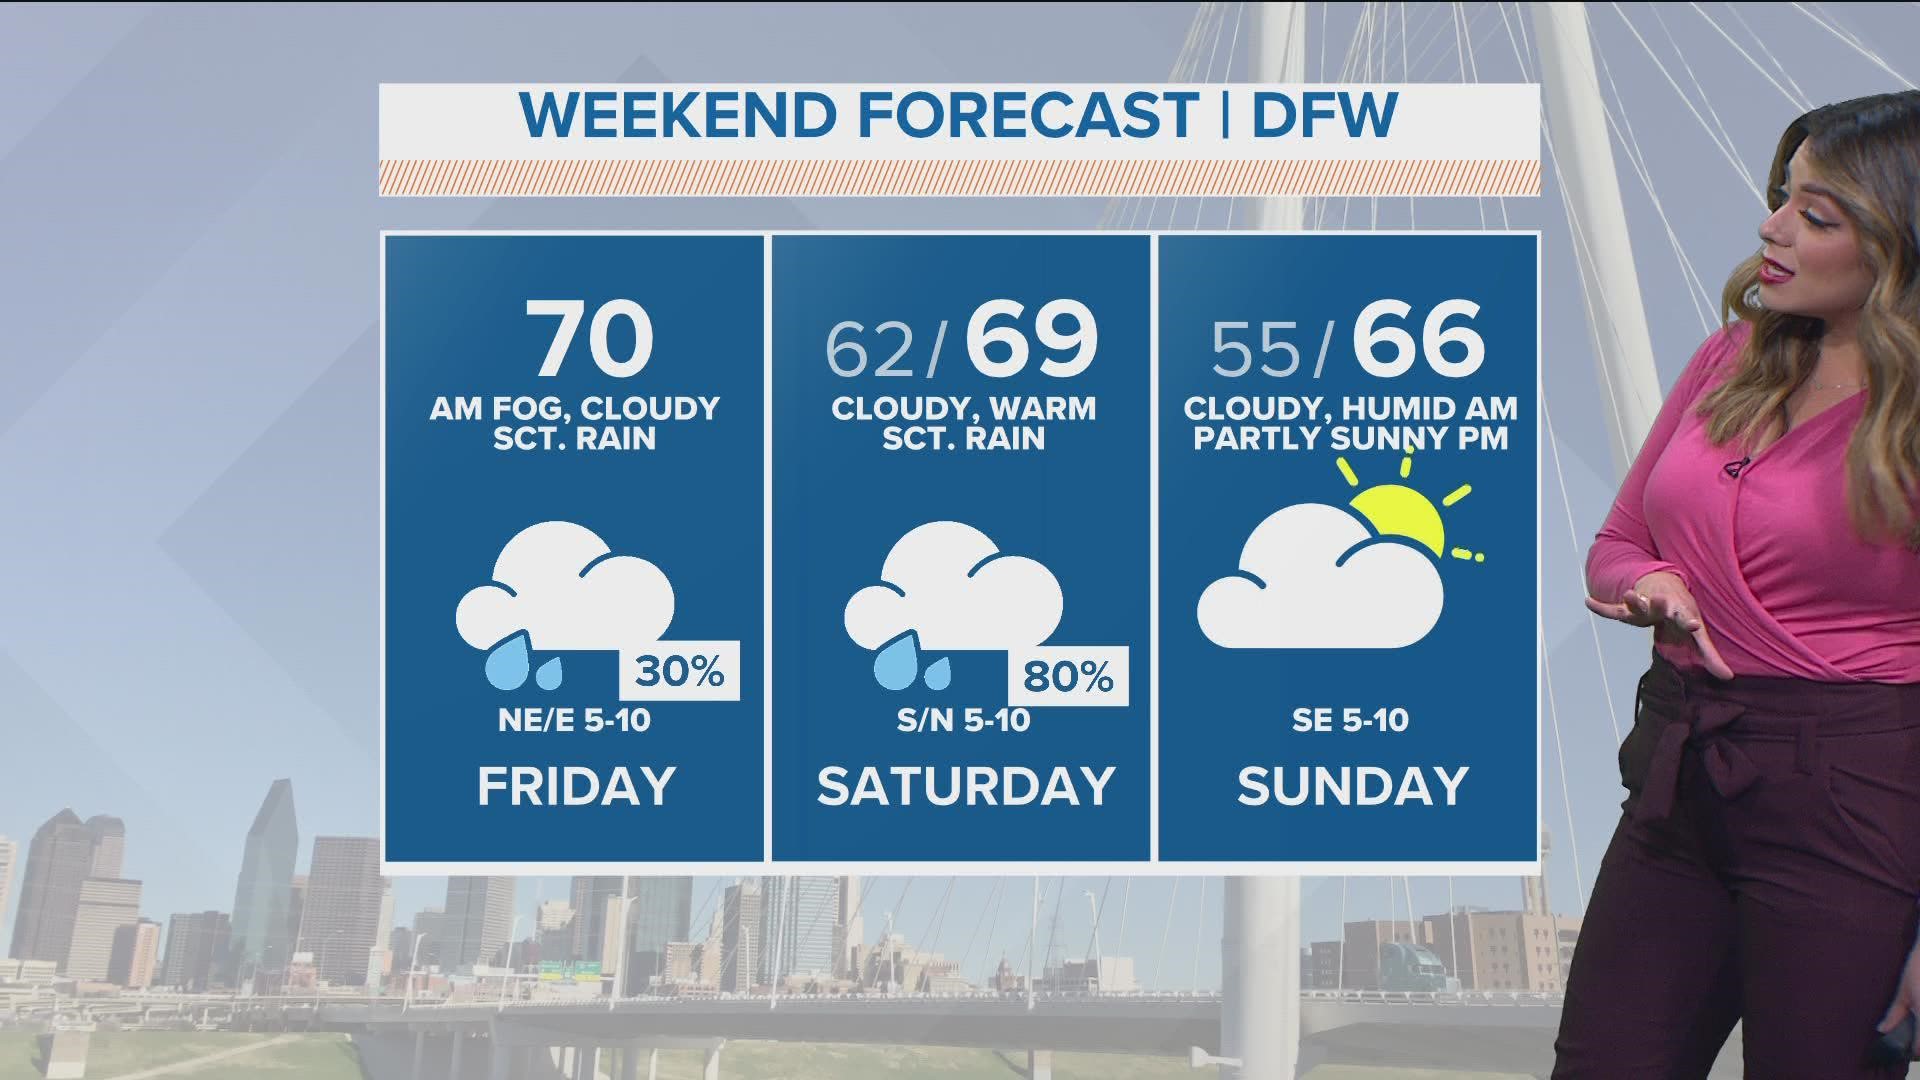 WFAA's Mariel Ruiz gives an updated timeline of the weekend forecast.